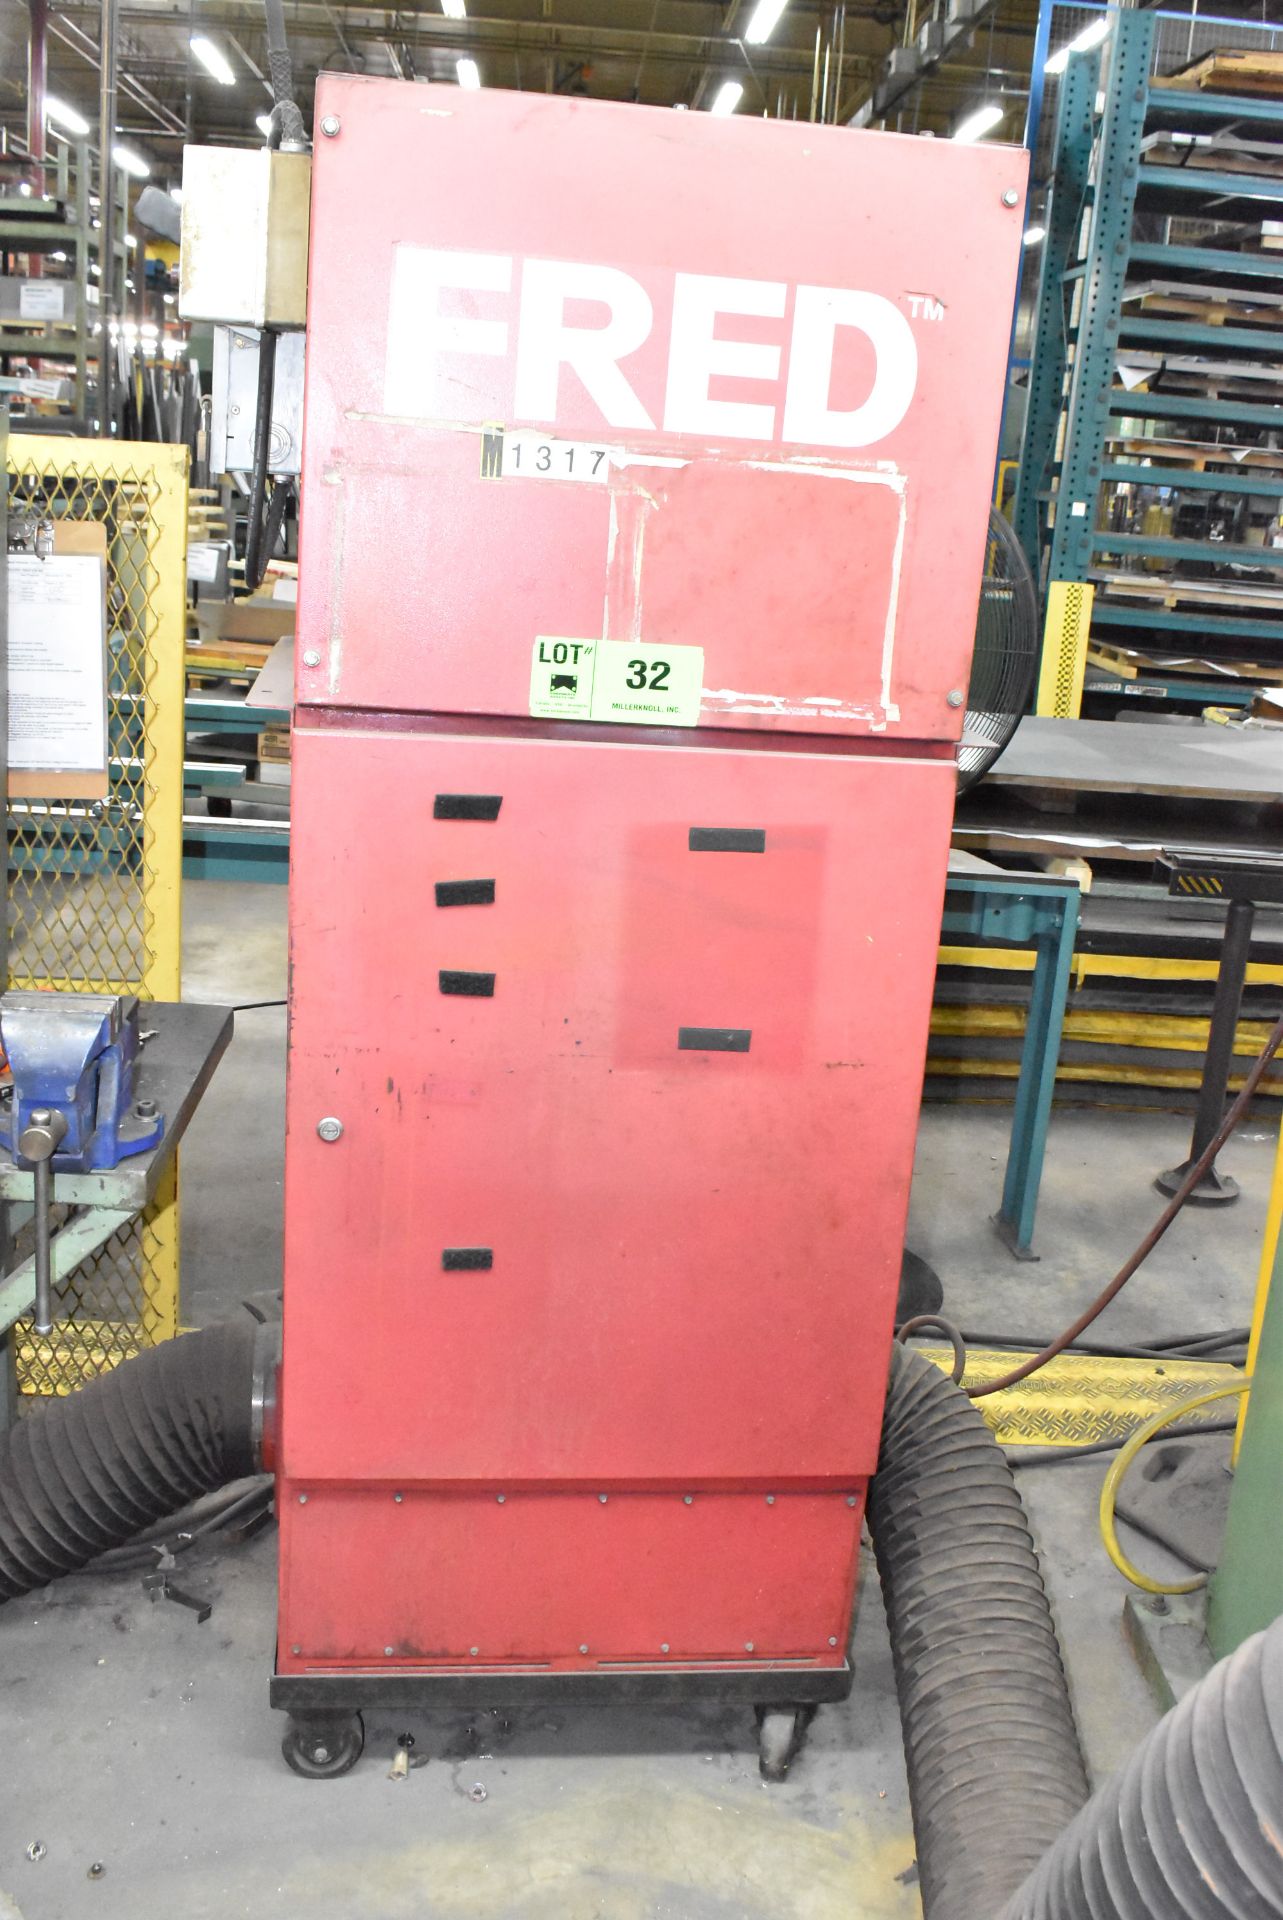 DIVERSI-TECH FRED DM1400 PORTABLE FUME EXTRACTOR, S/N DMA0080 (CI) [RIGGING FEE FOR LOT #32 - $175